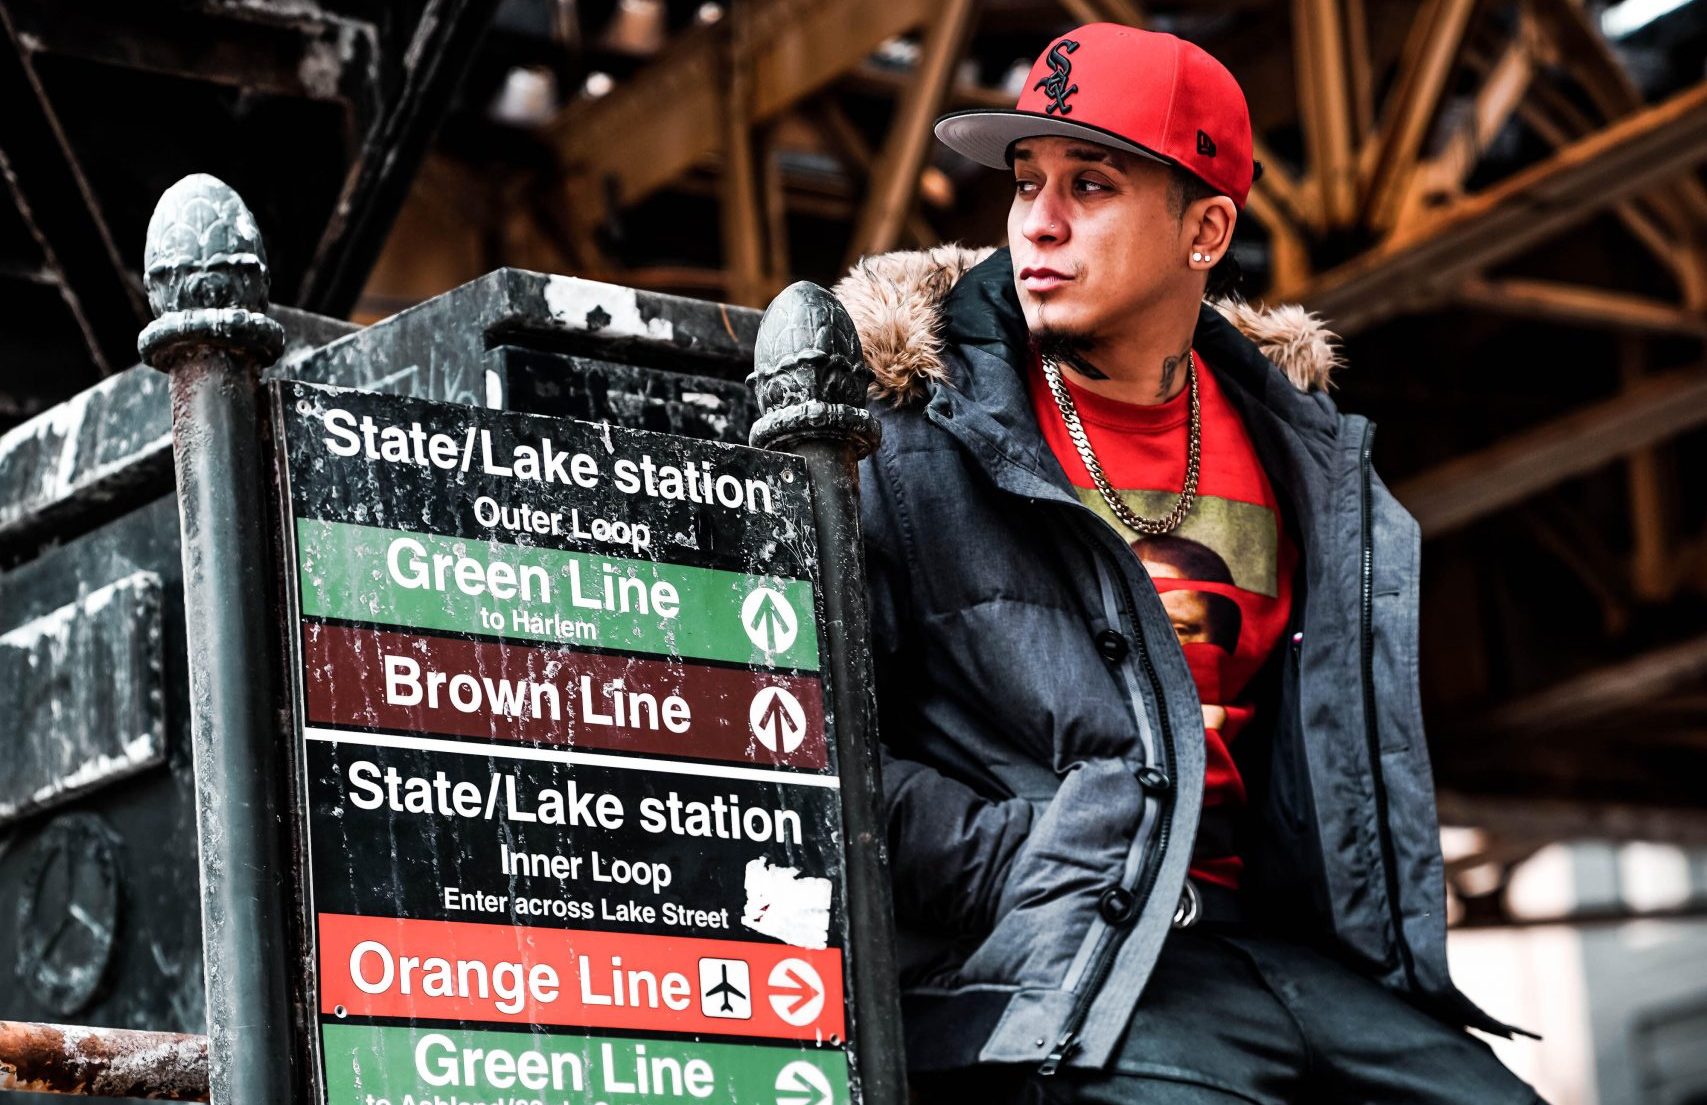 Well-Known Chicago artist Lito Garcia is Making his Mark in the industry